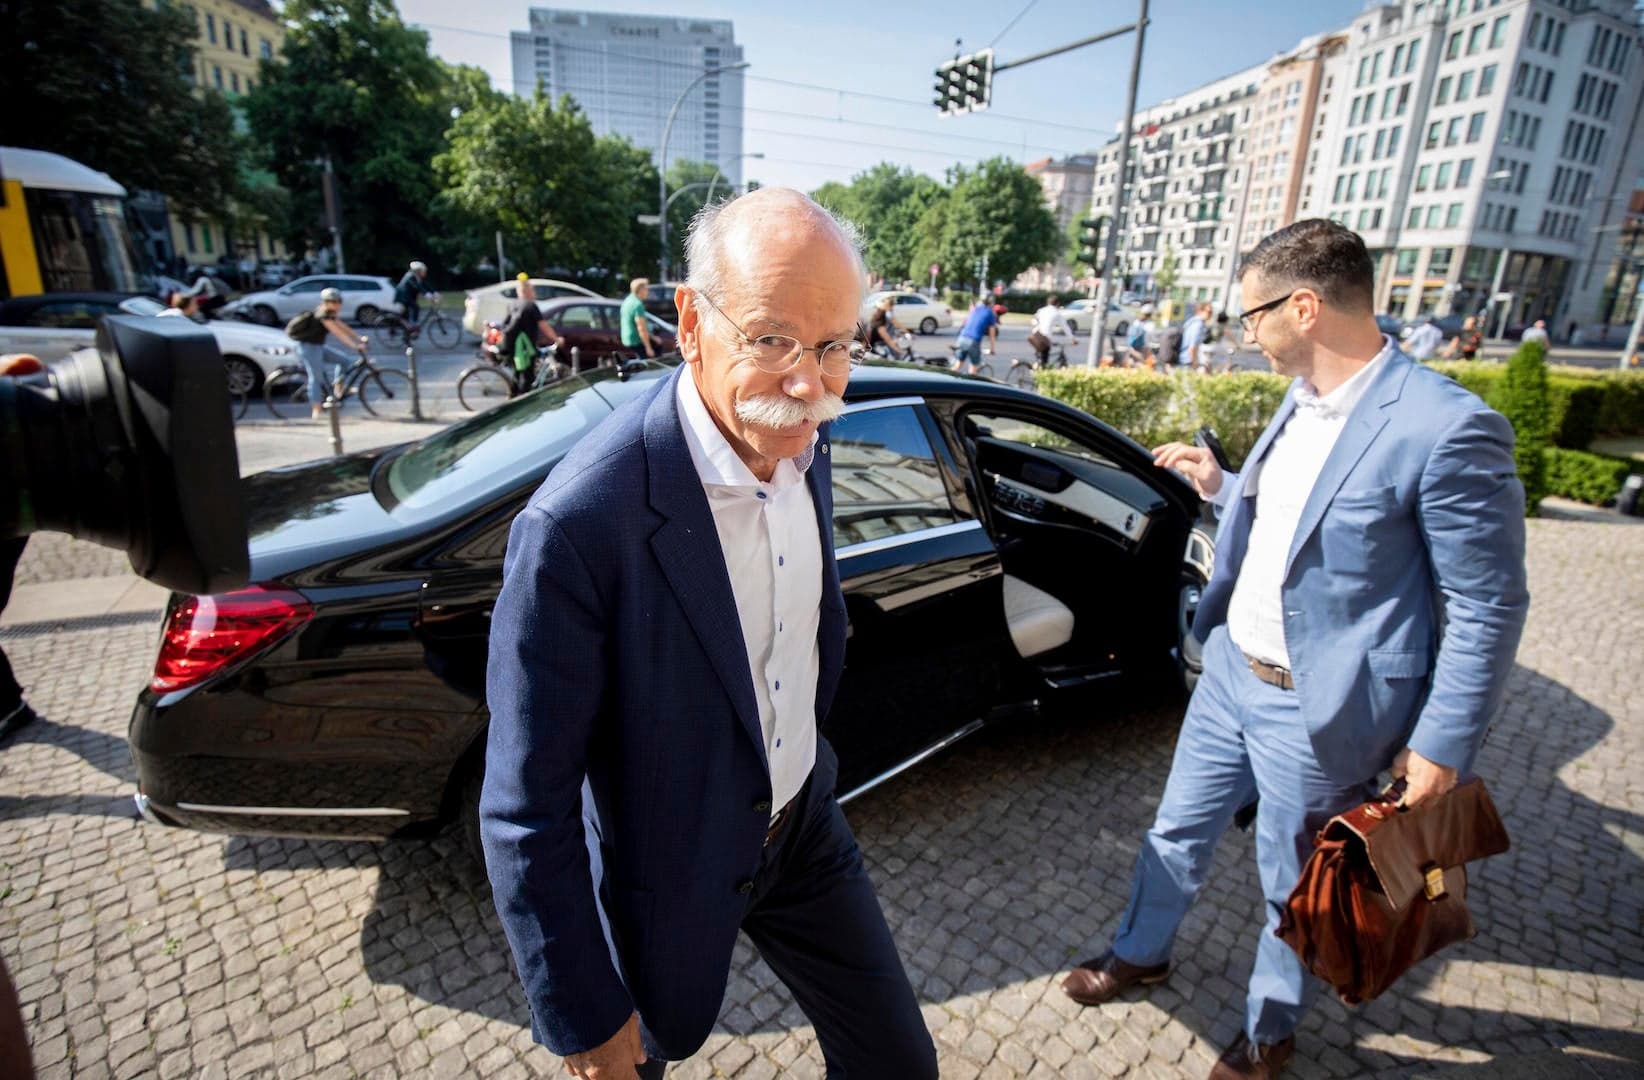 Dr. Dieter Zetsche Steps Down From Daimler Chairman Role After 12 Years